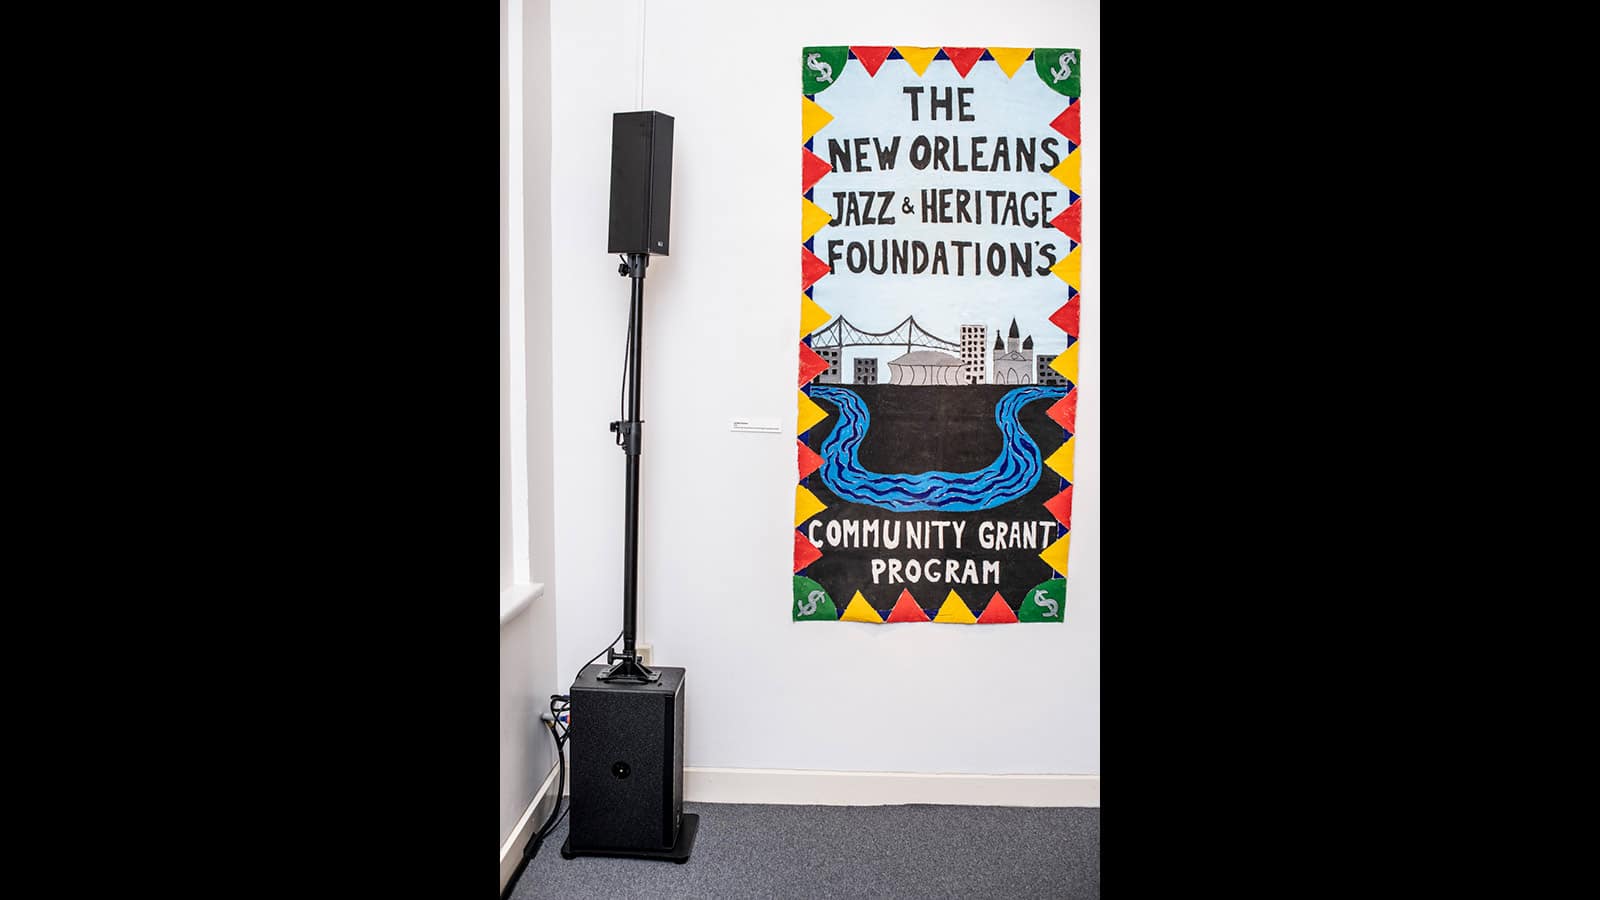 Meyer Sound Brings Festival Soundscapes to Life for New Orleans Jazz Museum Exhibition